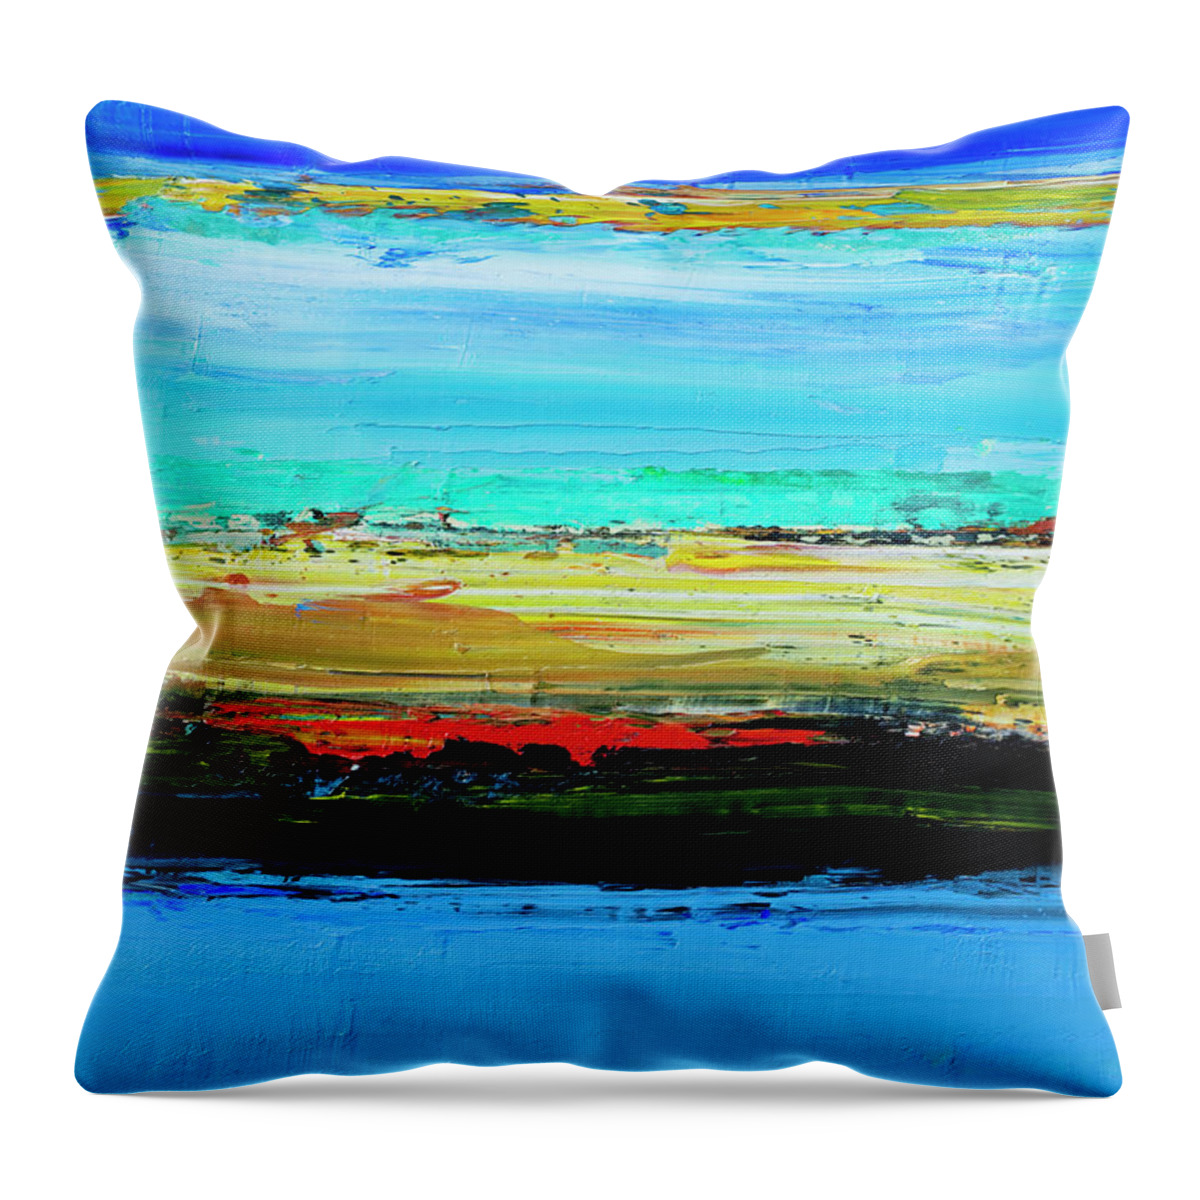 Oil Painting Throw Pillow featuring the photograph Abstract Painted Blue And Green Art by Ekely